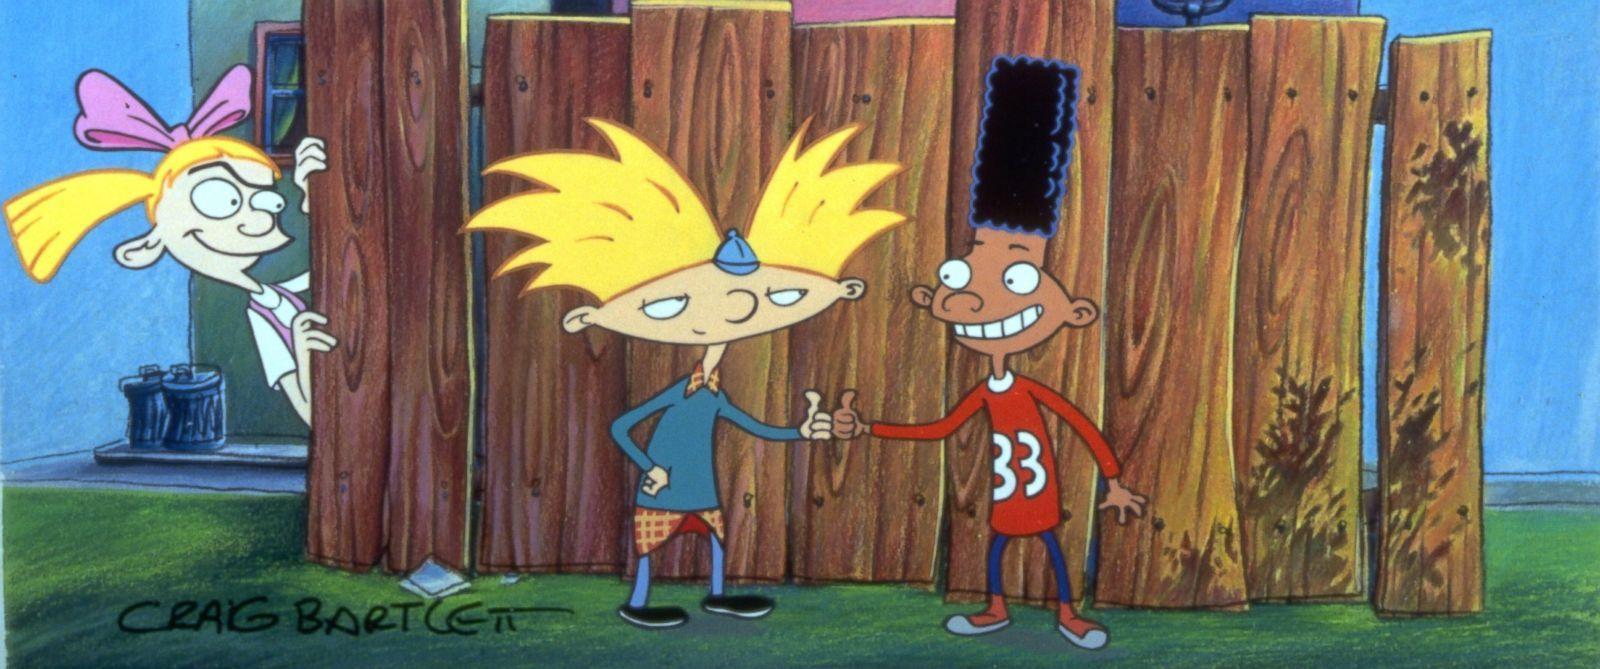 Nickelodeon Is Bringing Back 'Hey Arnold' in a Movie